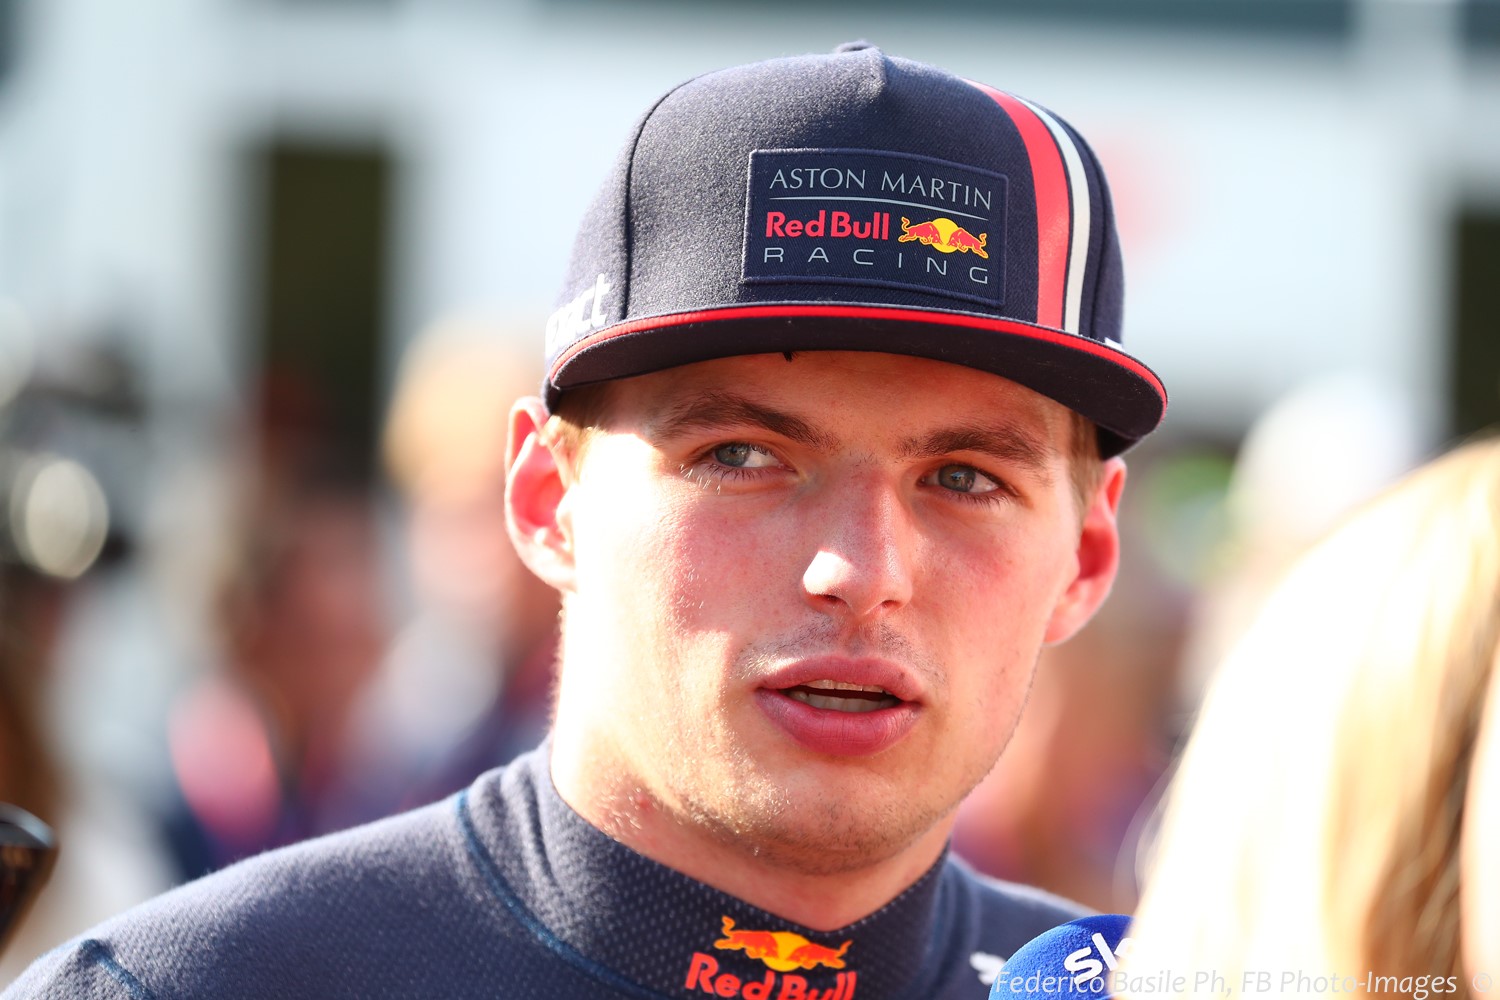 Verstappen realizes in F1 the car is 99% and without the best car he cannot win. In IndyCar, with the car being more spec, driver talent means something.